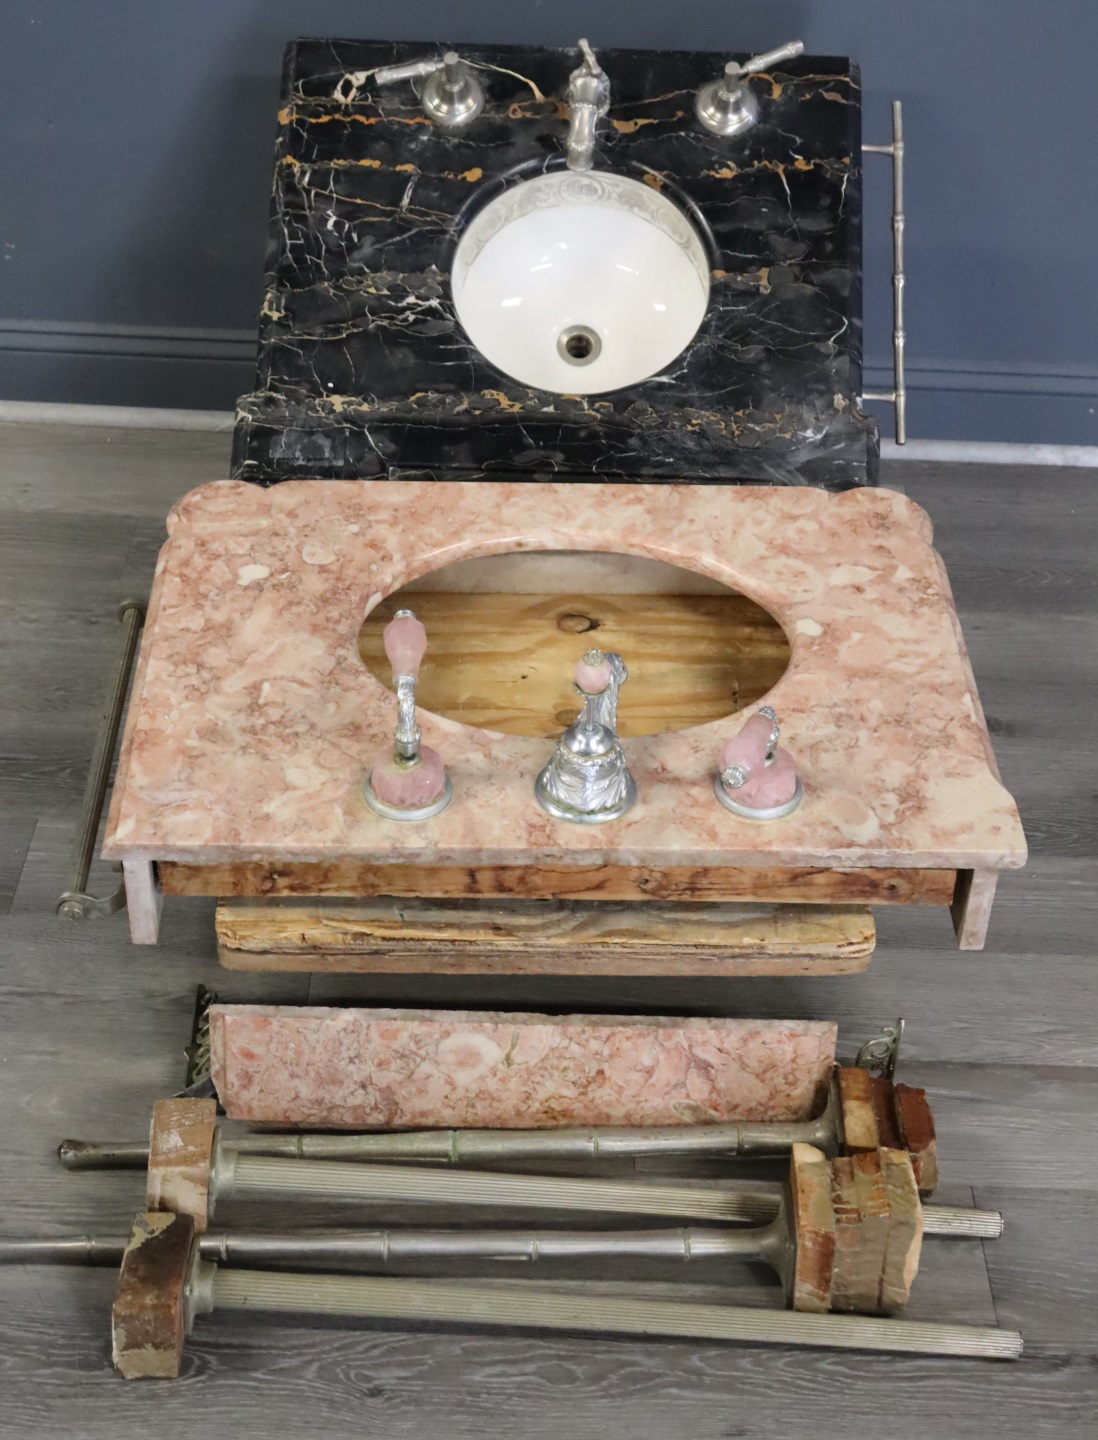 2 SHERYL WAGNER MARBLE SINKS. From